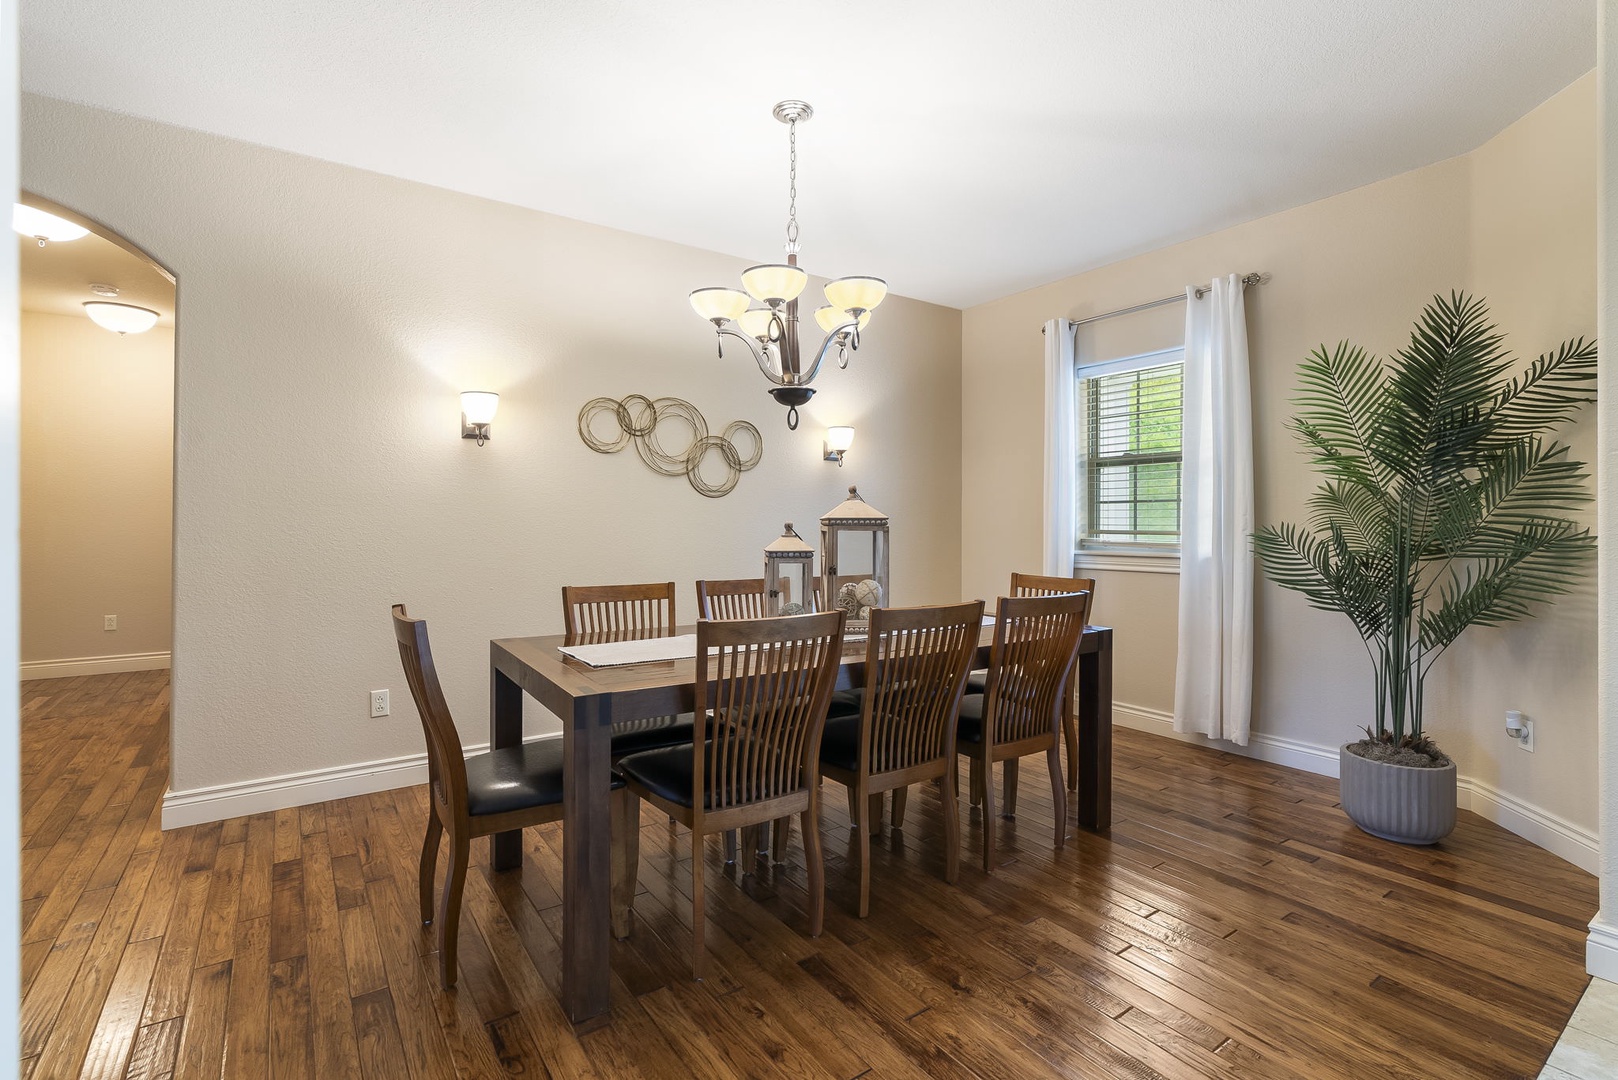 Dining room table with seating for 8